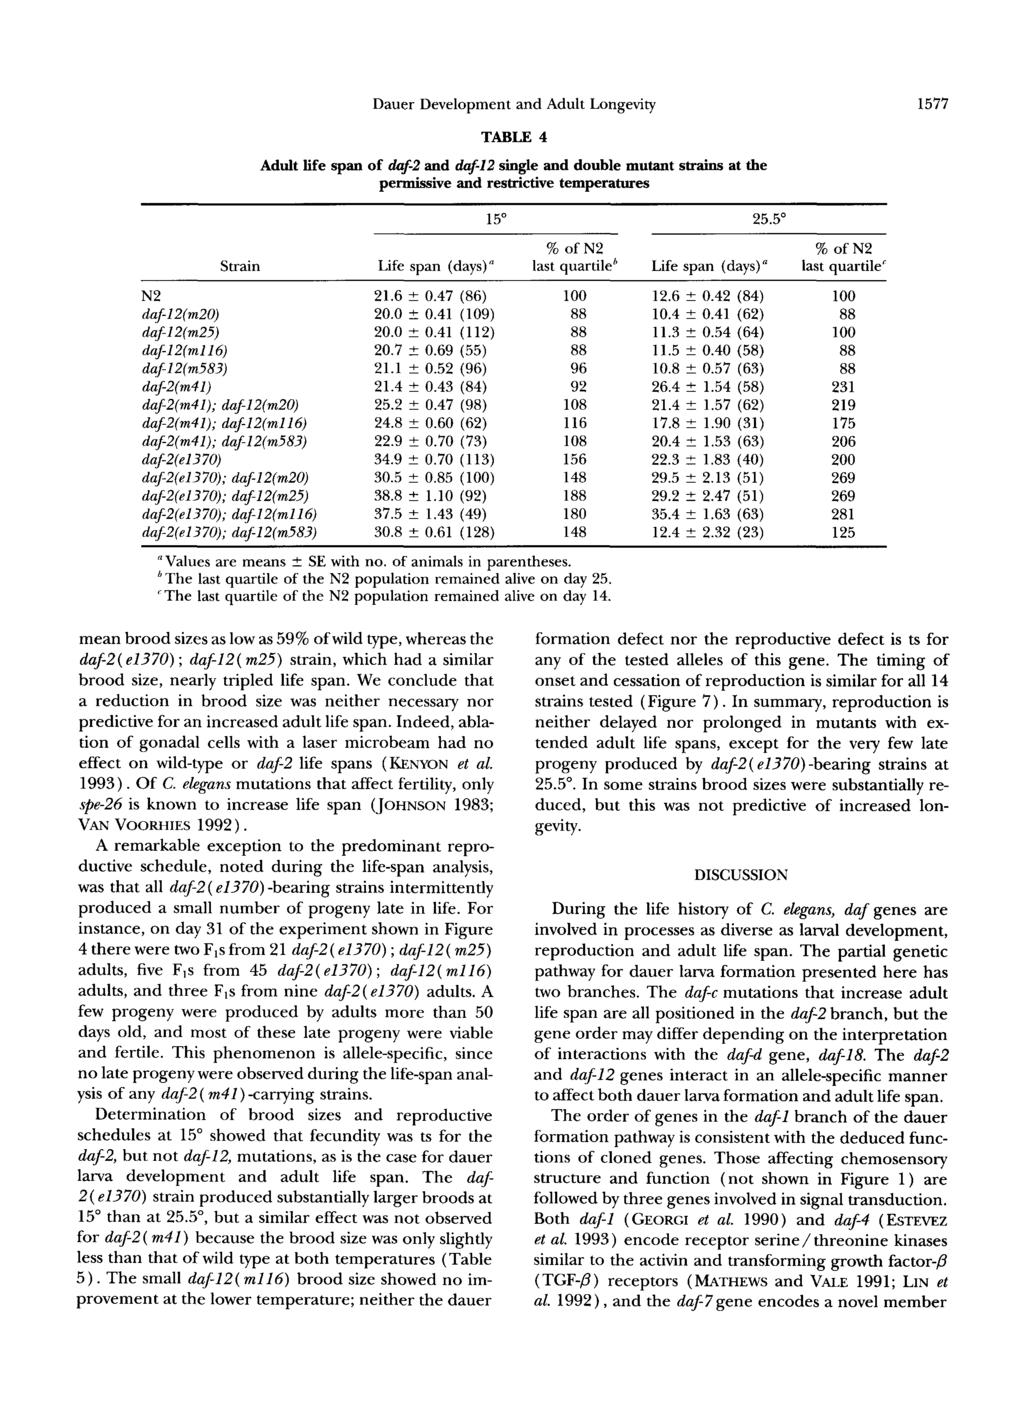 Dauer Development and Adult Longevity 1577 TABLE 4 Adult life span of daf-2 and daf-12 single and double mutant strains at the permissive and restrictive temperatures 15" 25.